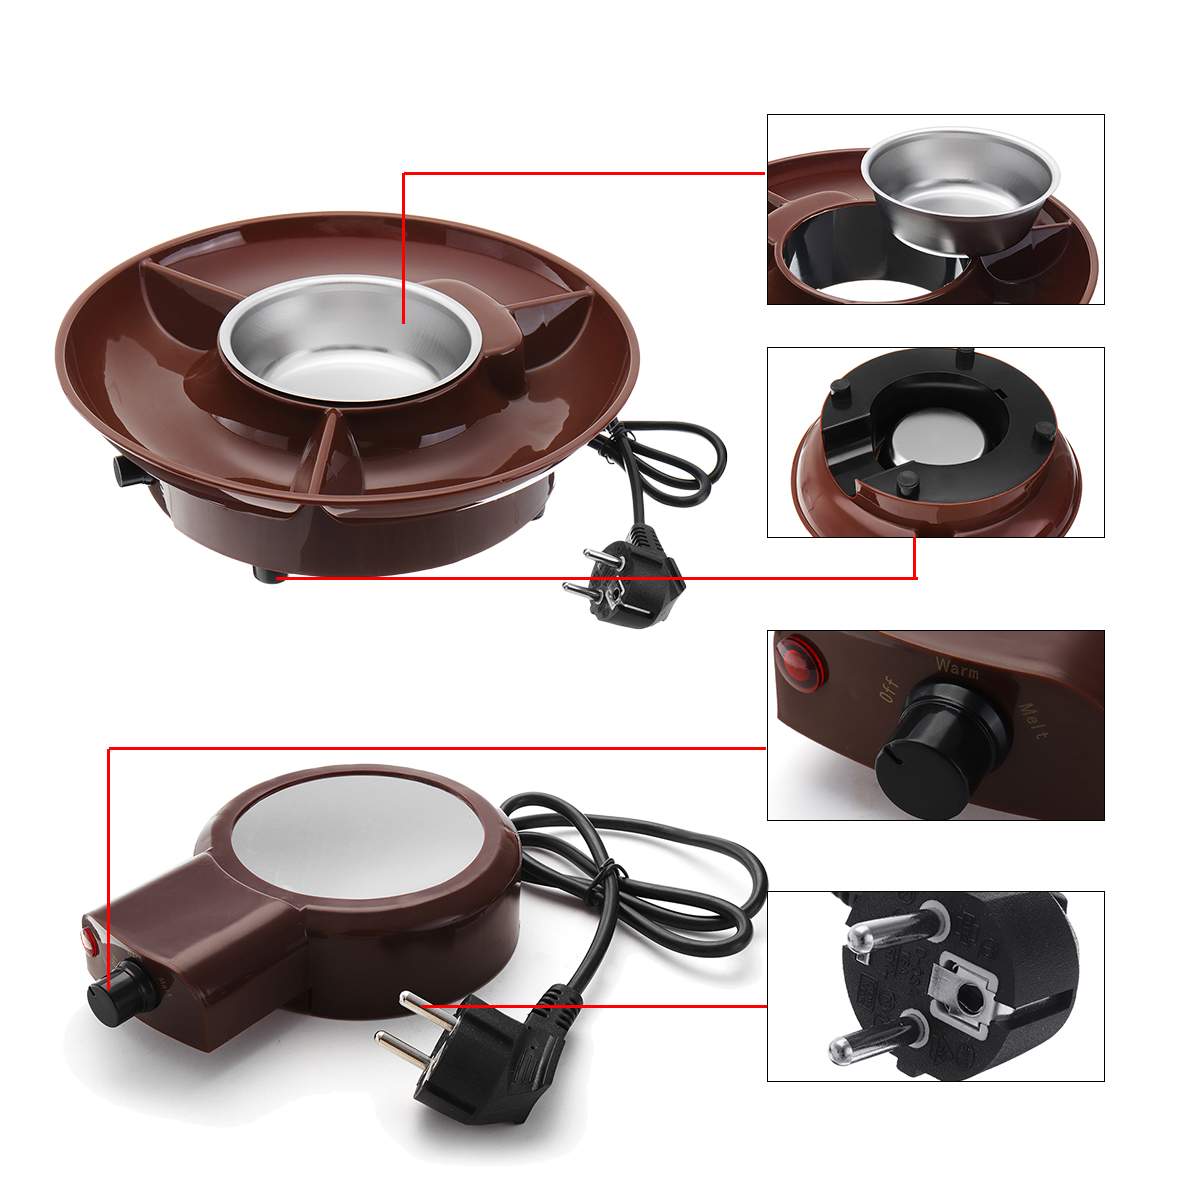 Electric Melting Pot 260ml Chocolate Fondue Maker Candy Dessert Cheese Fountain Boiler Temperature Control for Party Kitchen